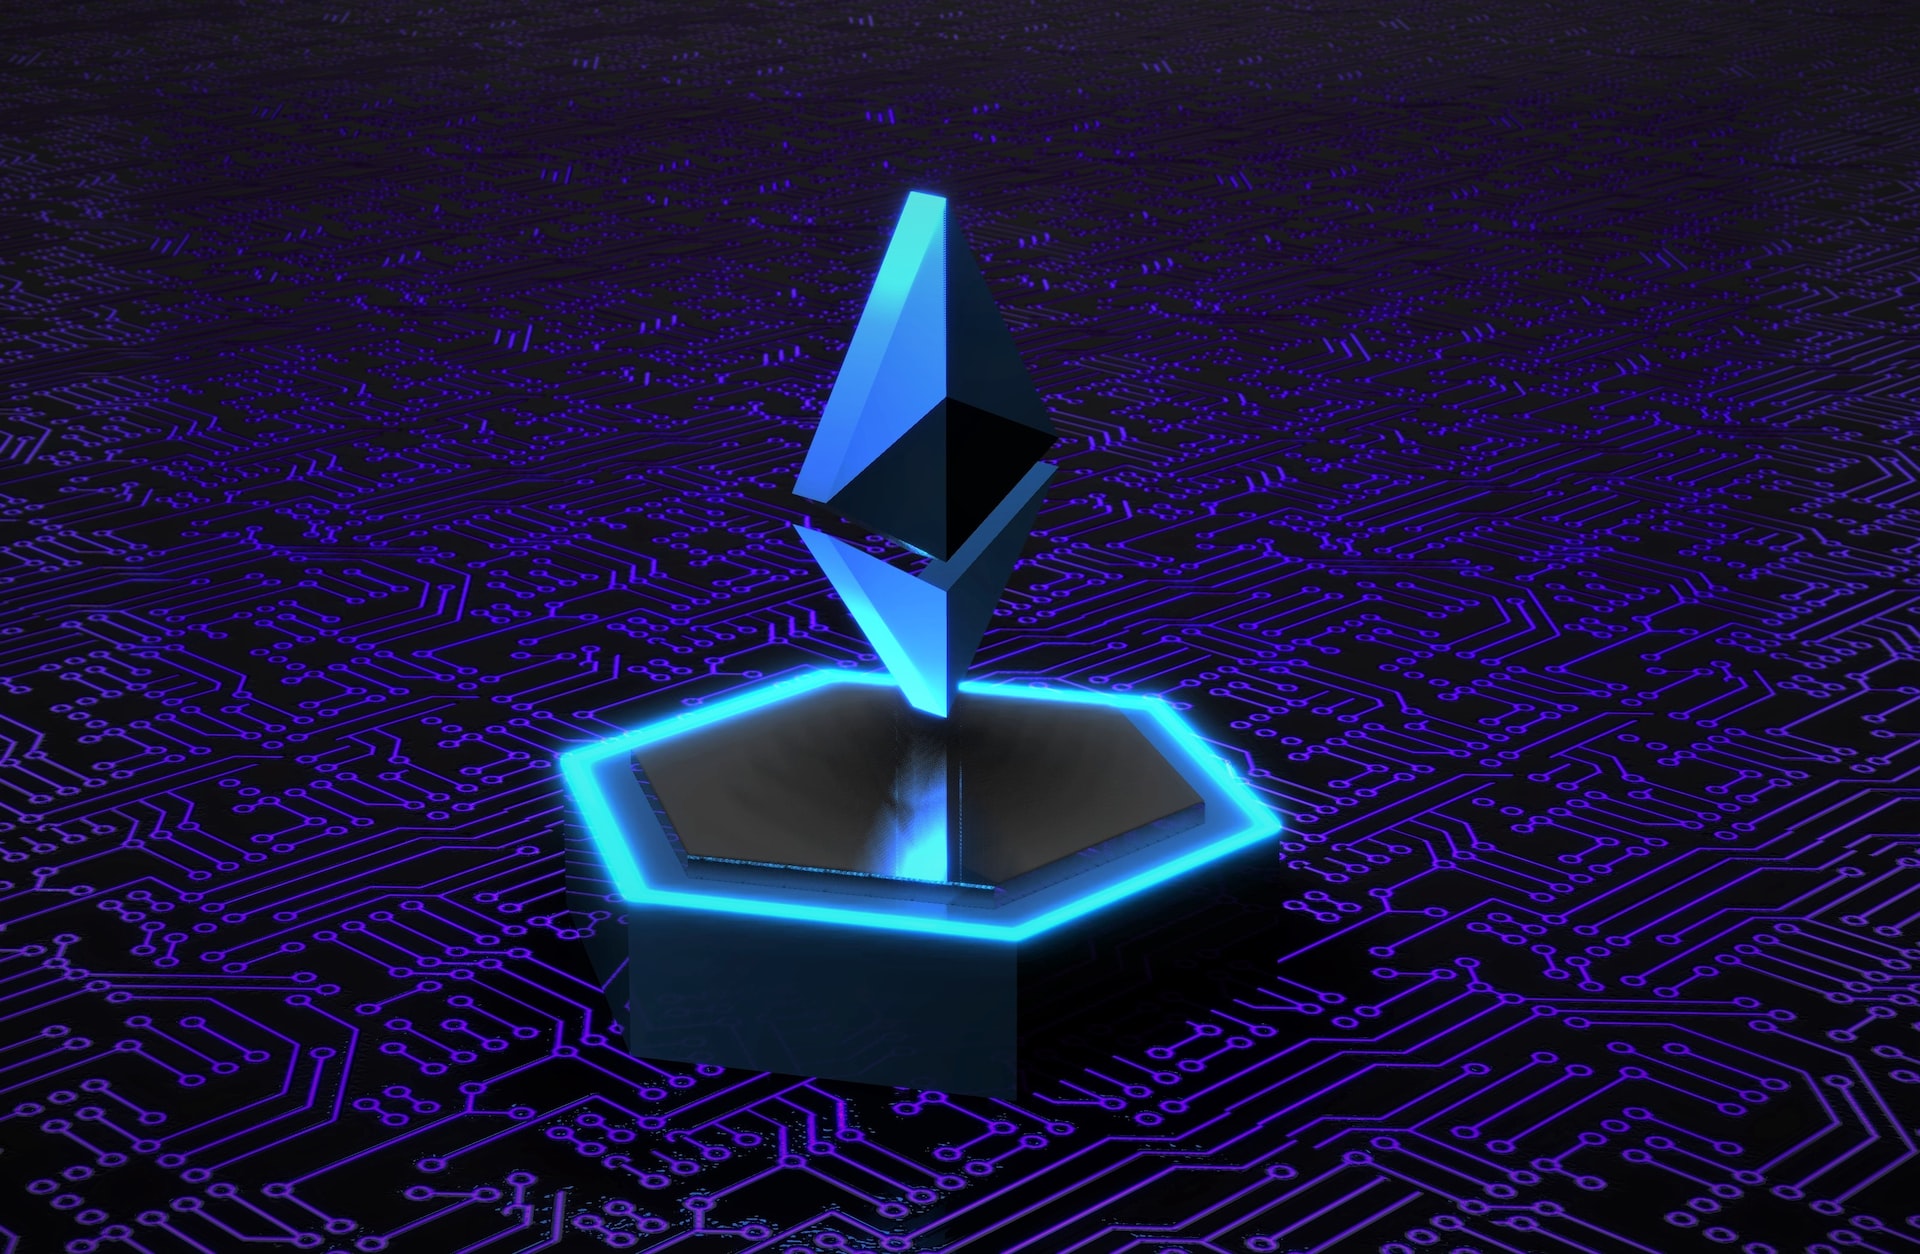 Ethereum Price Lost 20% Weekly, What’s The Key Support Now?